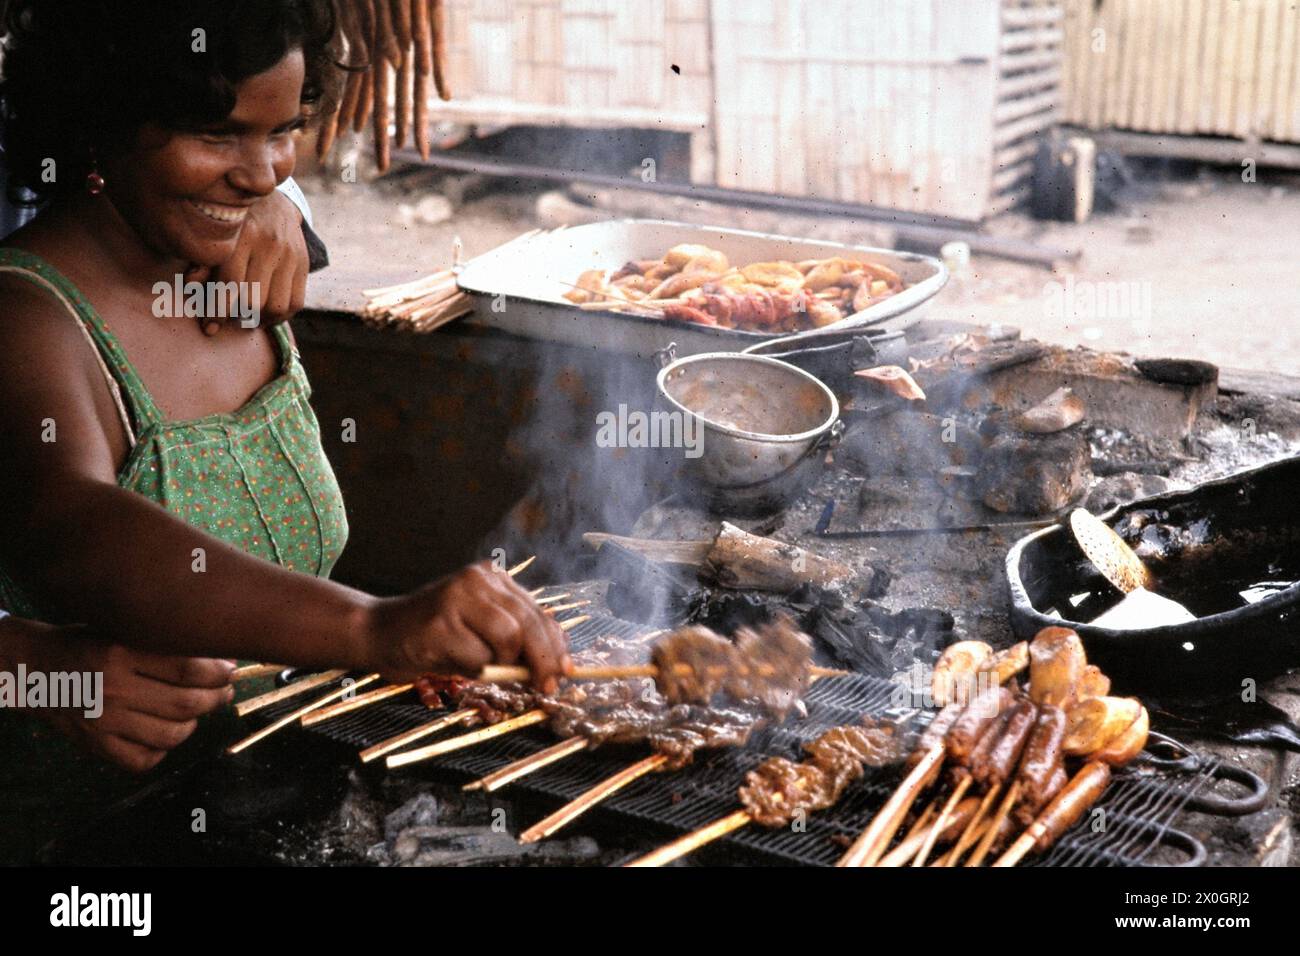 A woman puts meat and vegetable sticks on a barbecue in Machala. Stock Photo